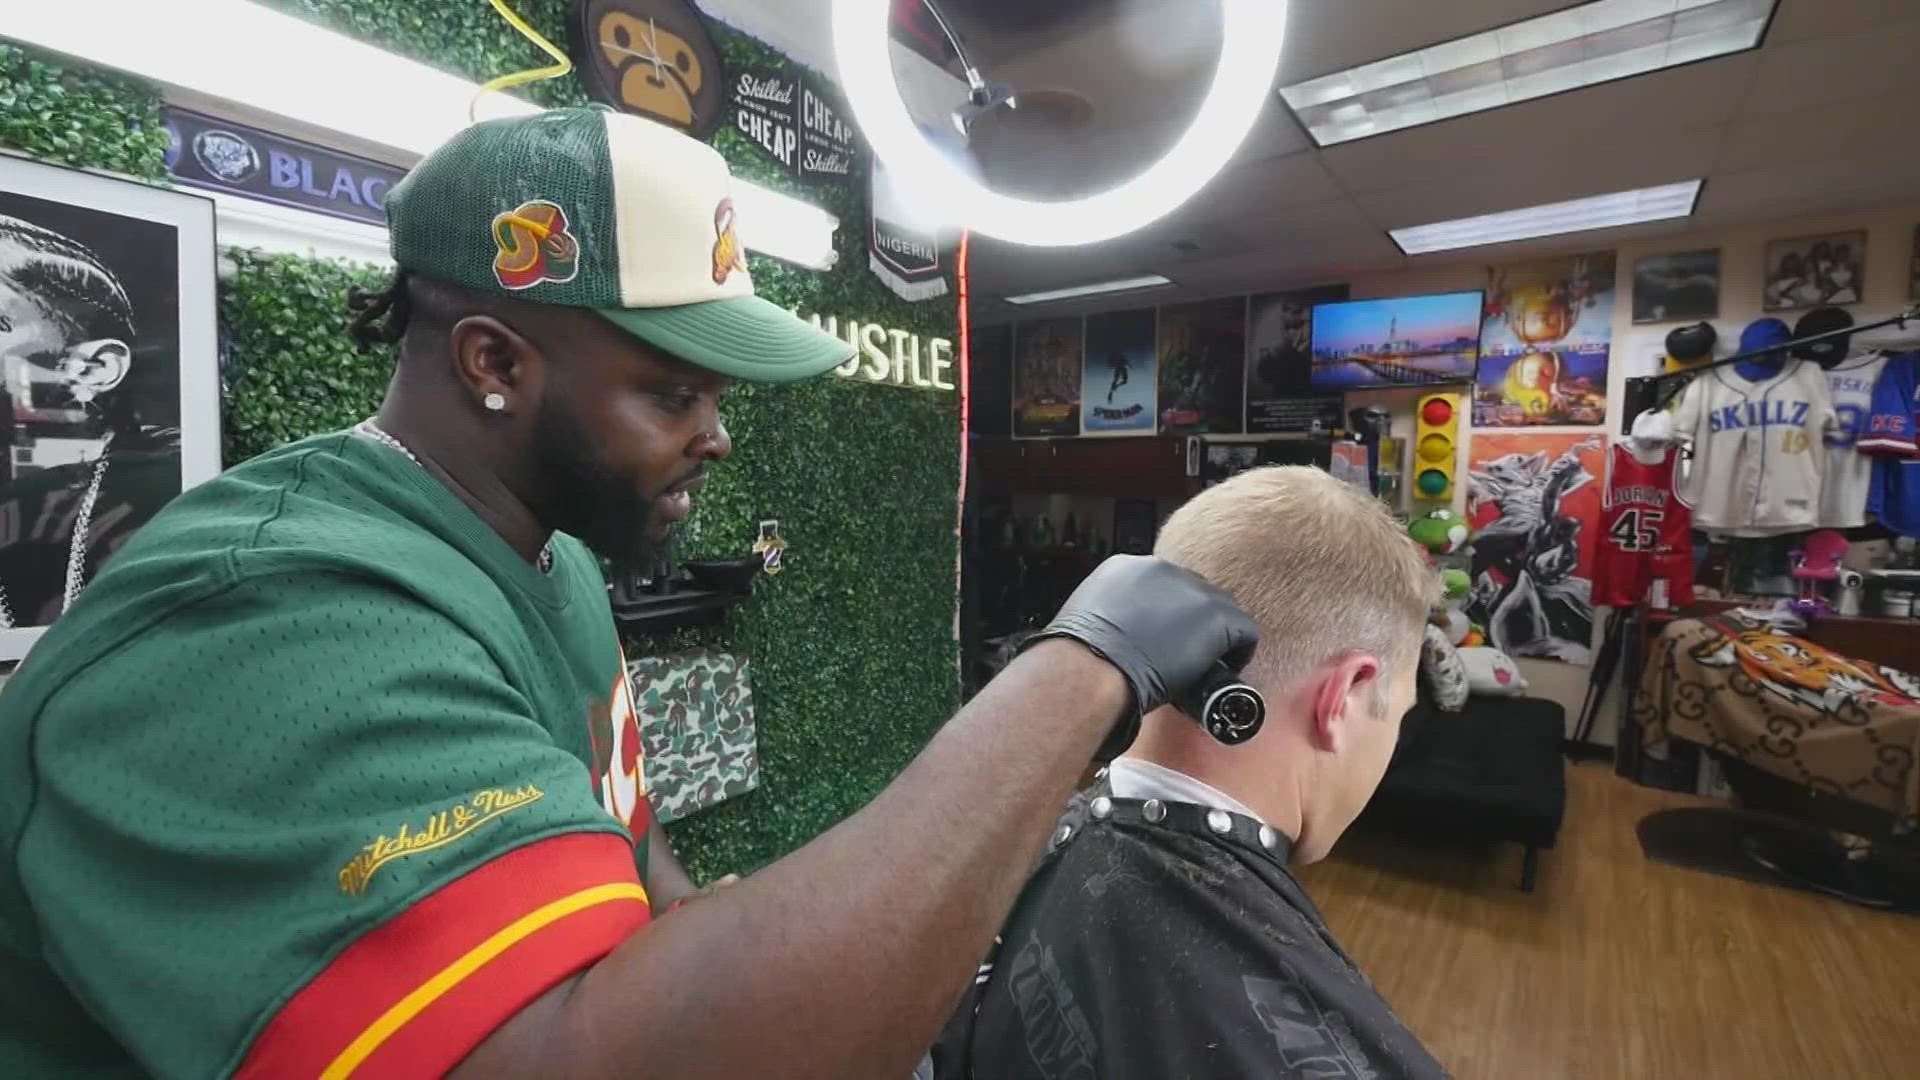 KING 5 anchor gets Mariners' logo shaved in head